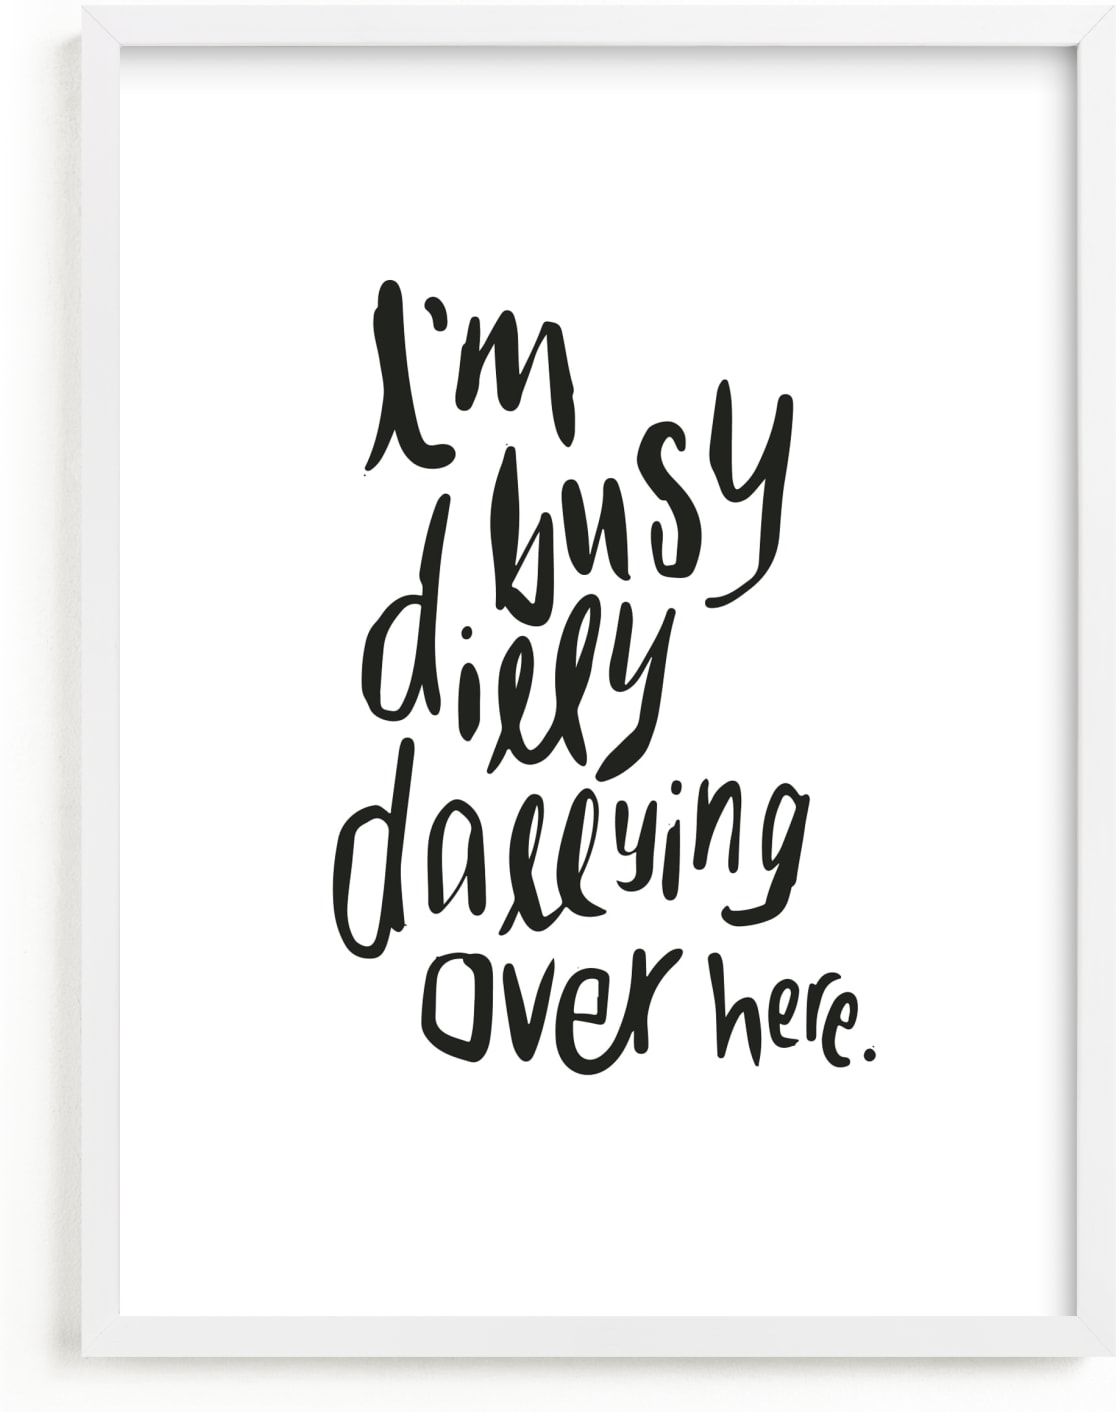 This is a black and white kids wall art by Inkblot Design called Dillydally all day.